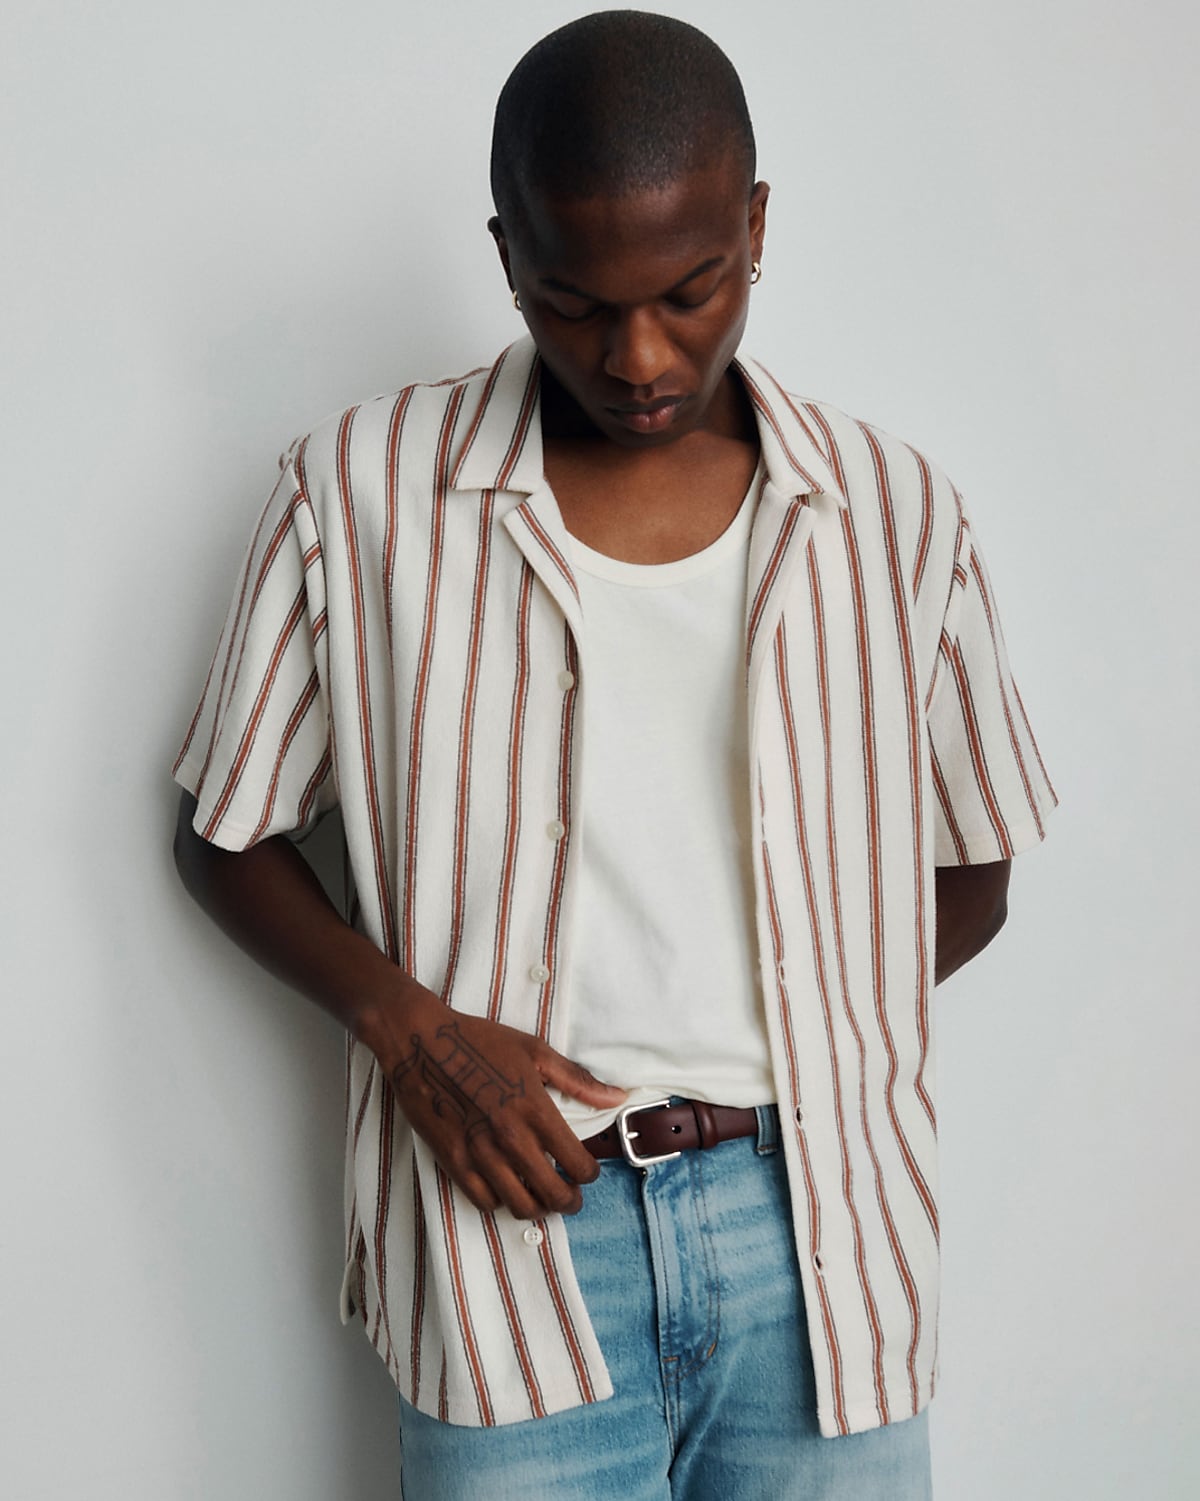 man wearing jeans, and striped short sleeve collared shirt